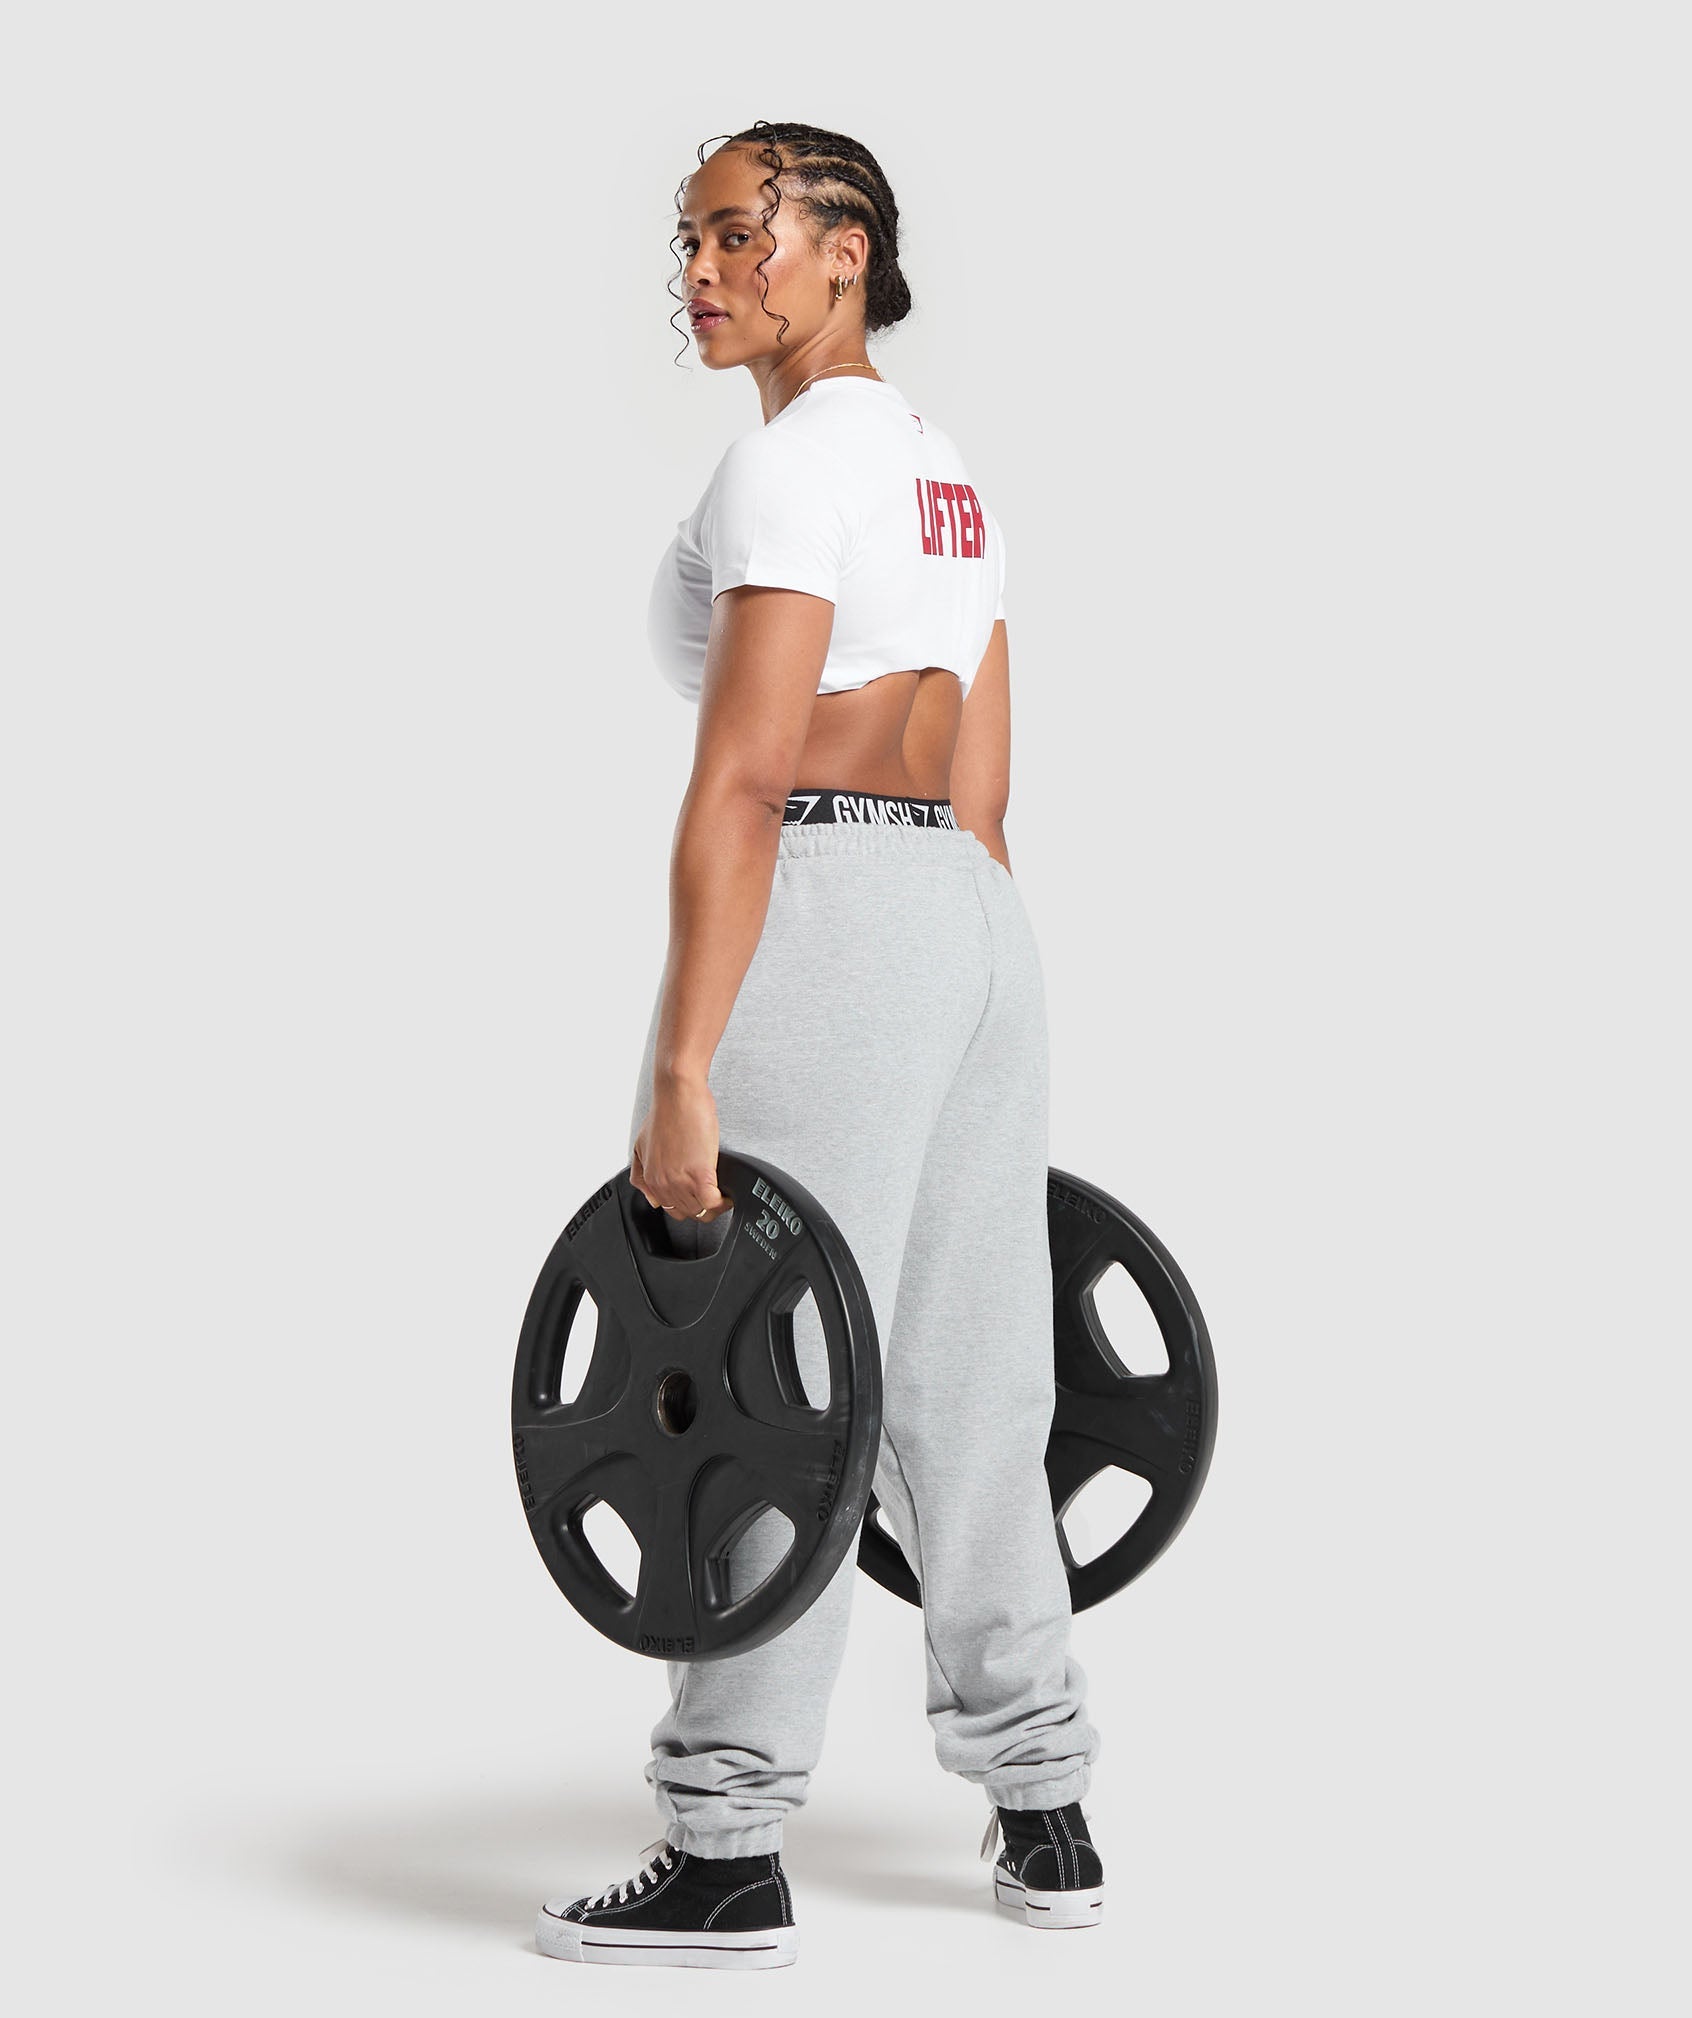 Strong Lifter Baby Tee in White - view 4